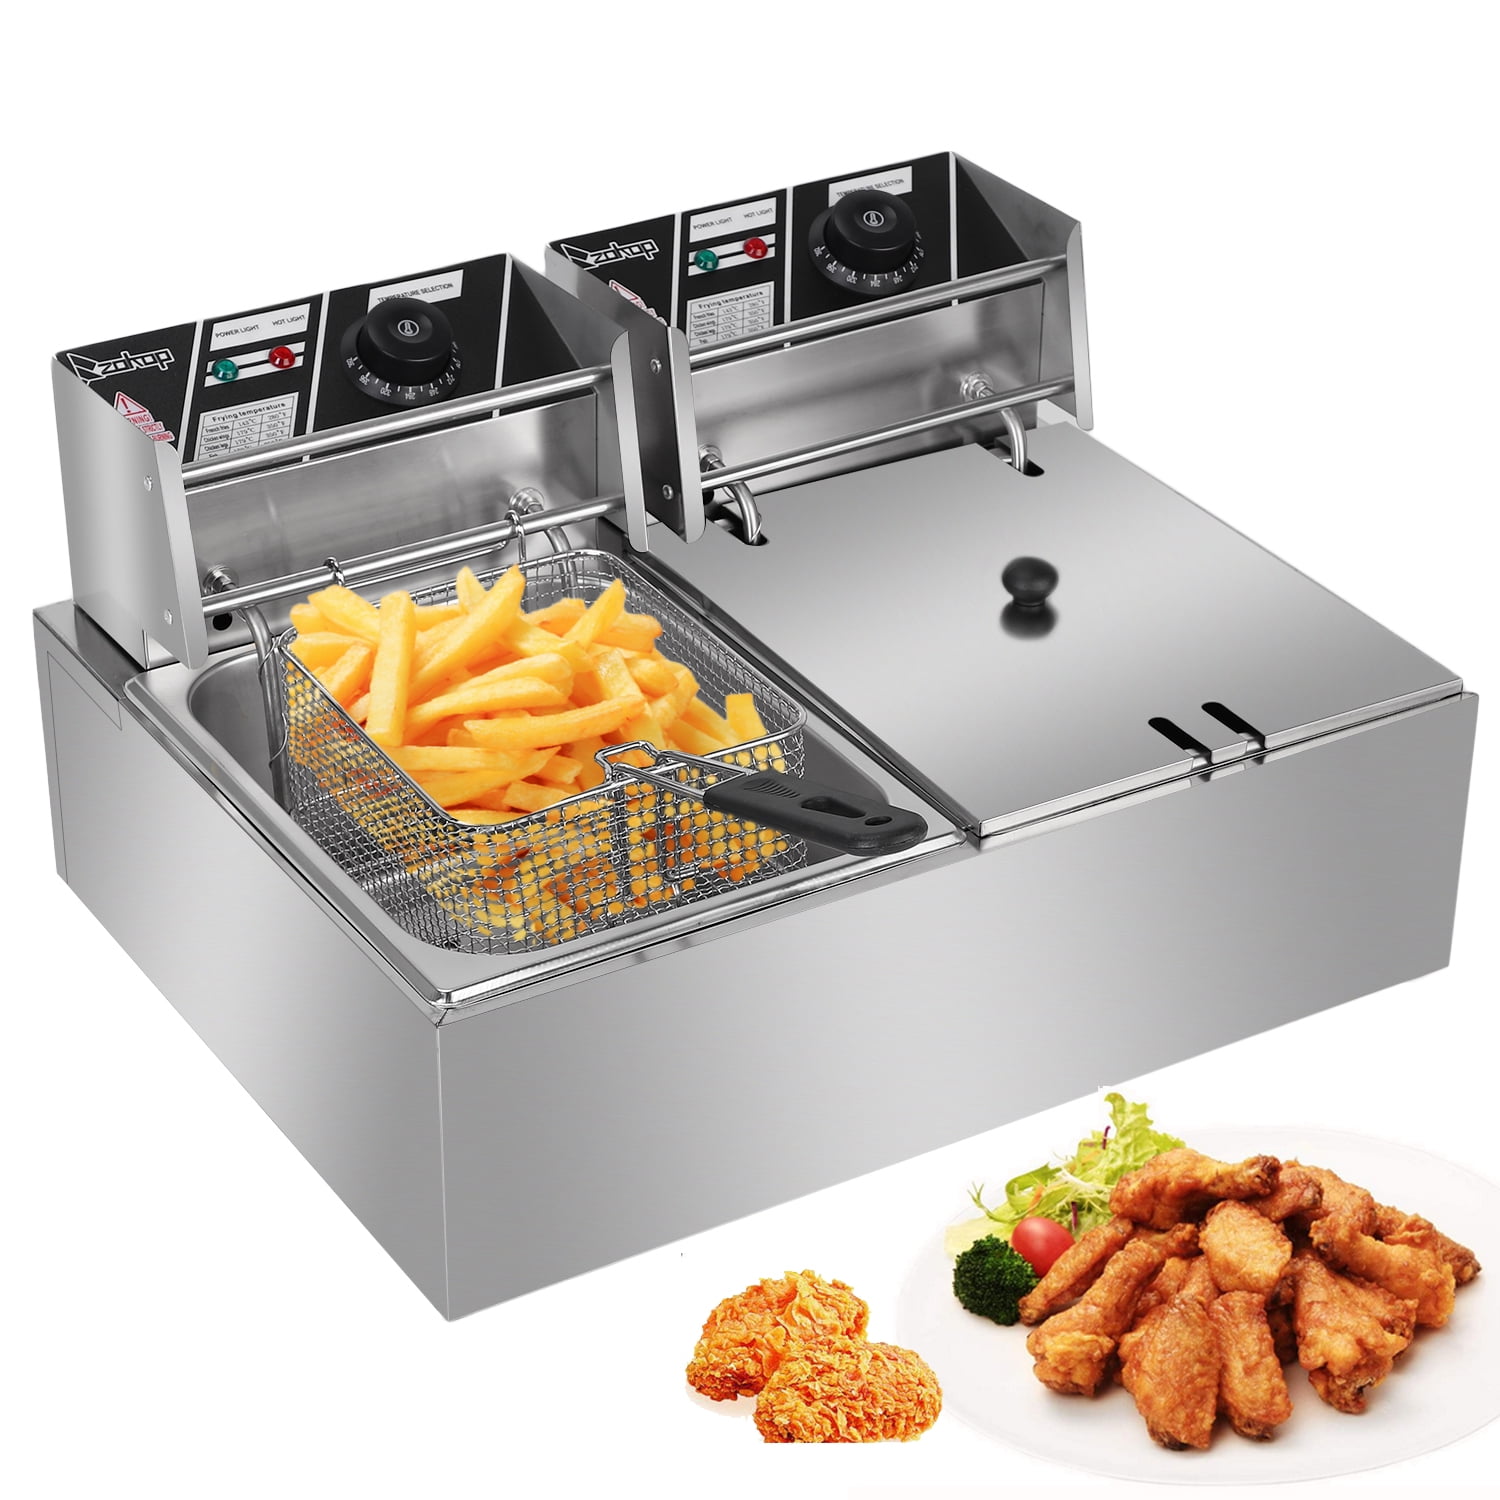 Quest 34250 1.5 Litre 900W Brushed Stainless Steel Square Deep Fat Fryer for sale online 